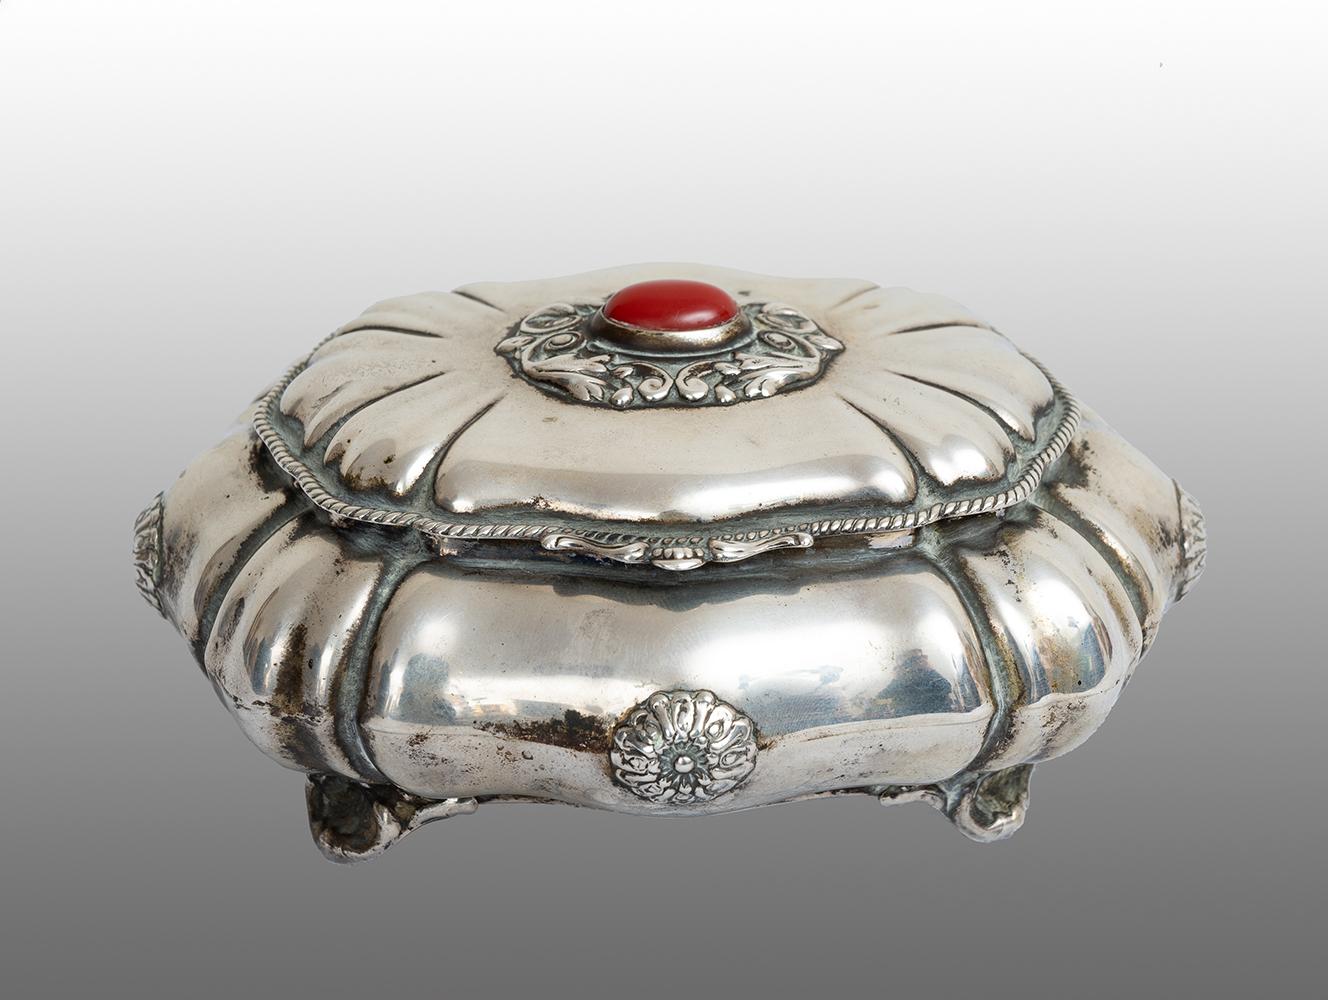 Silver jewelry box belonging to the early 20th century. - Art by Unknown